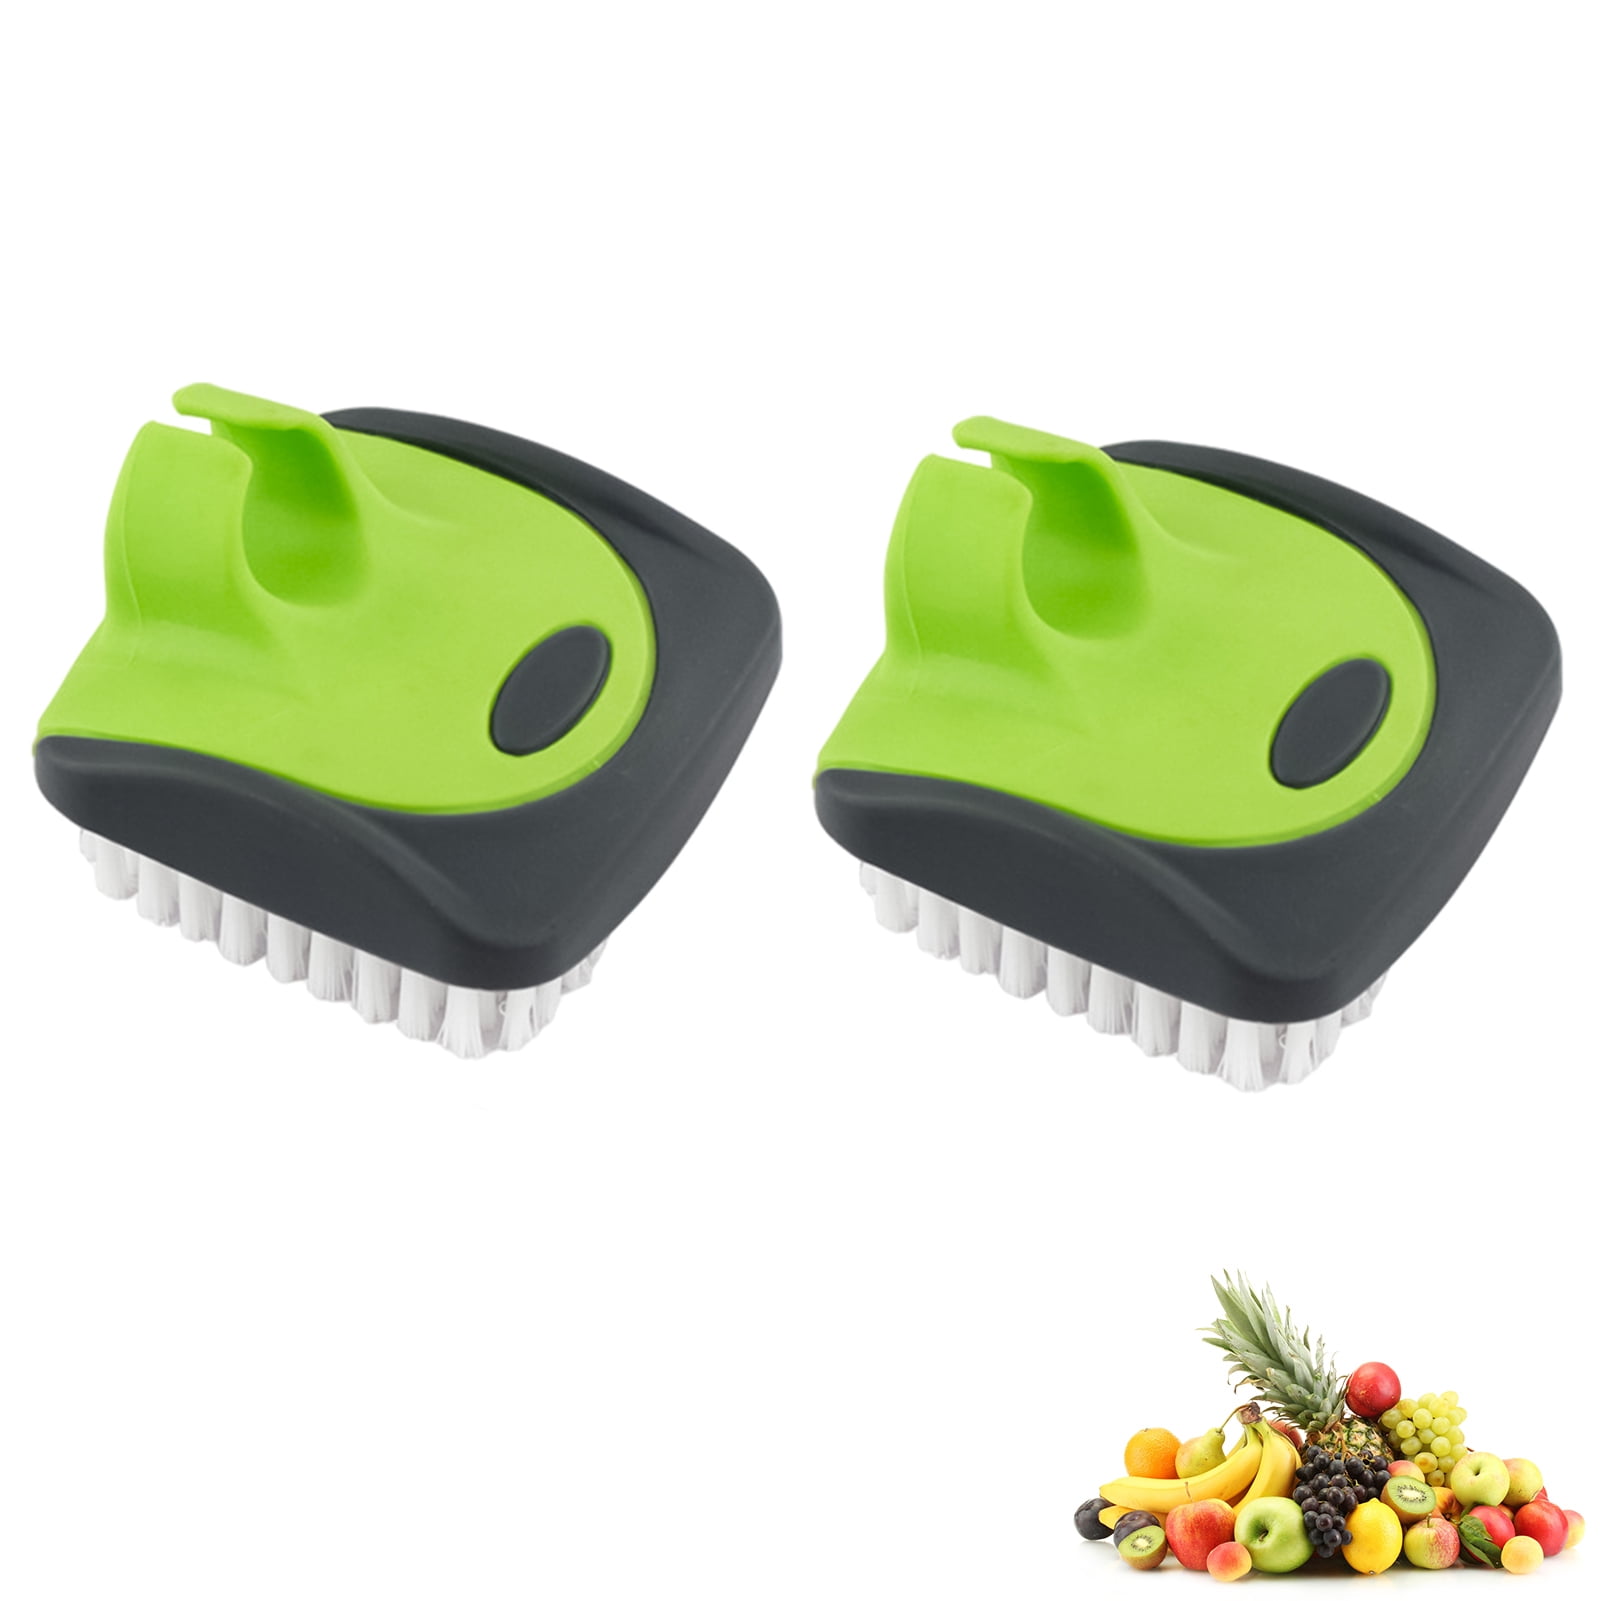 NicheMkt Vegetable Brush, Beechwood Handle, Natural Bristles (Hard and  Soft) for Cleaning Potato, Carrot, Celery, Cucumber, Onion, Avocado and  Fruits